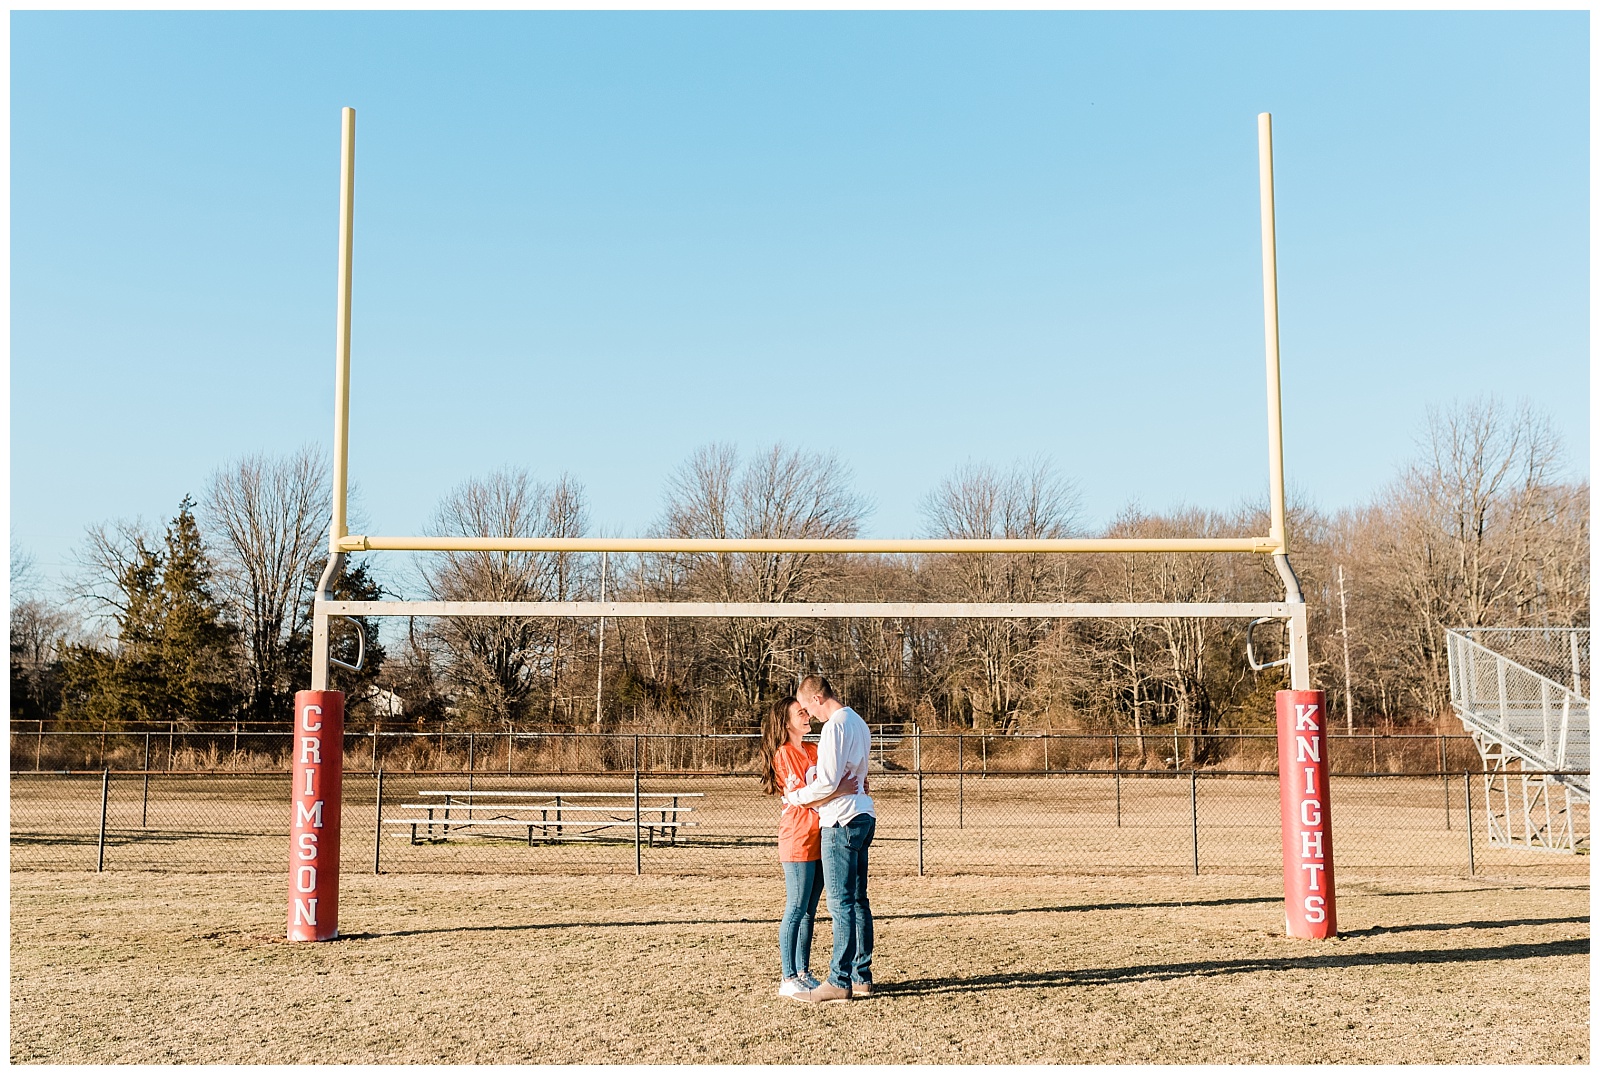 New Jersey, Engagement Session, Wedding Photographer, NFL, Coach, LA Chargers, Football, Athletic, Sporty, Jersey, Field Goal